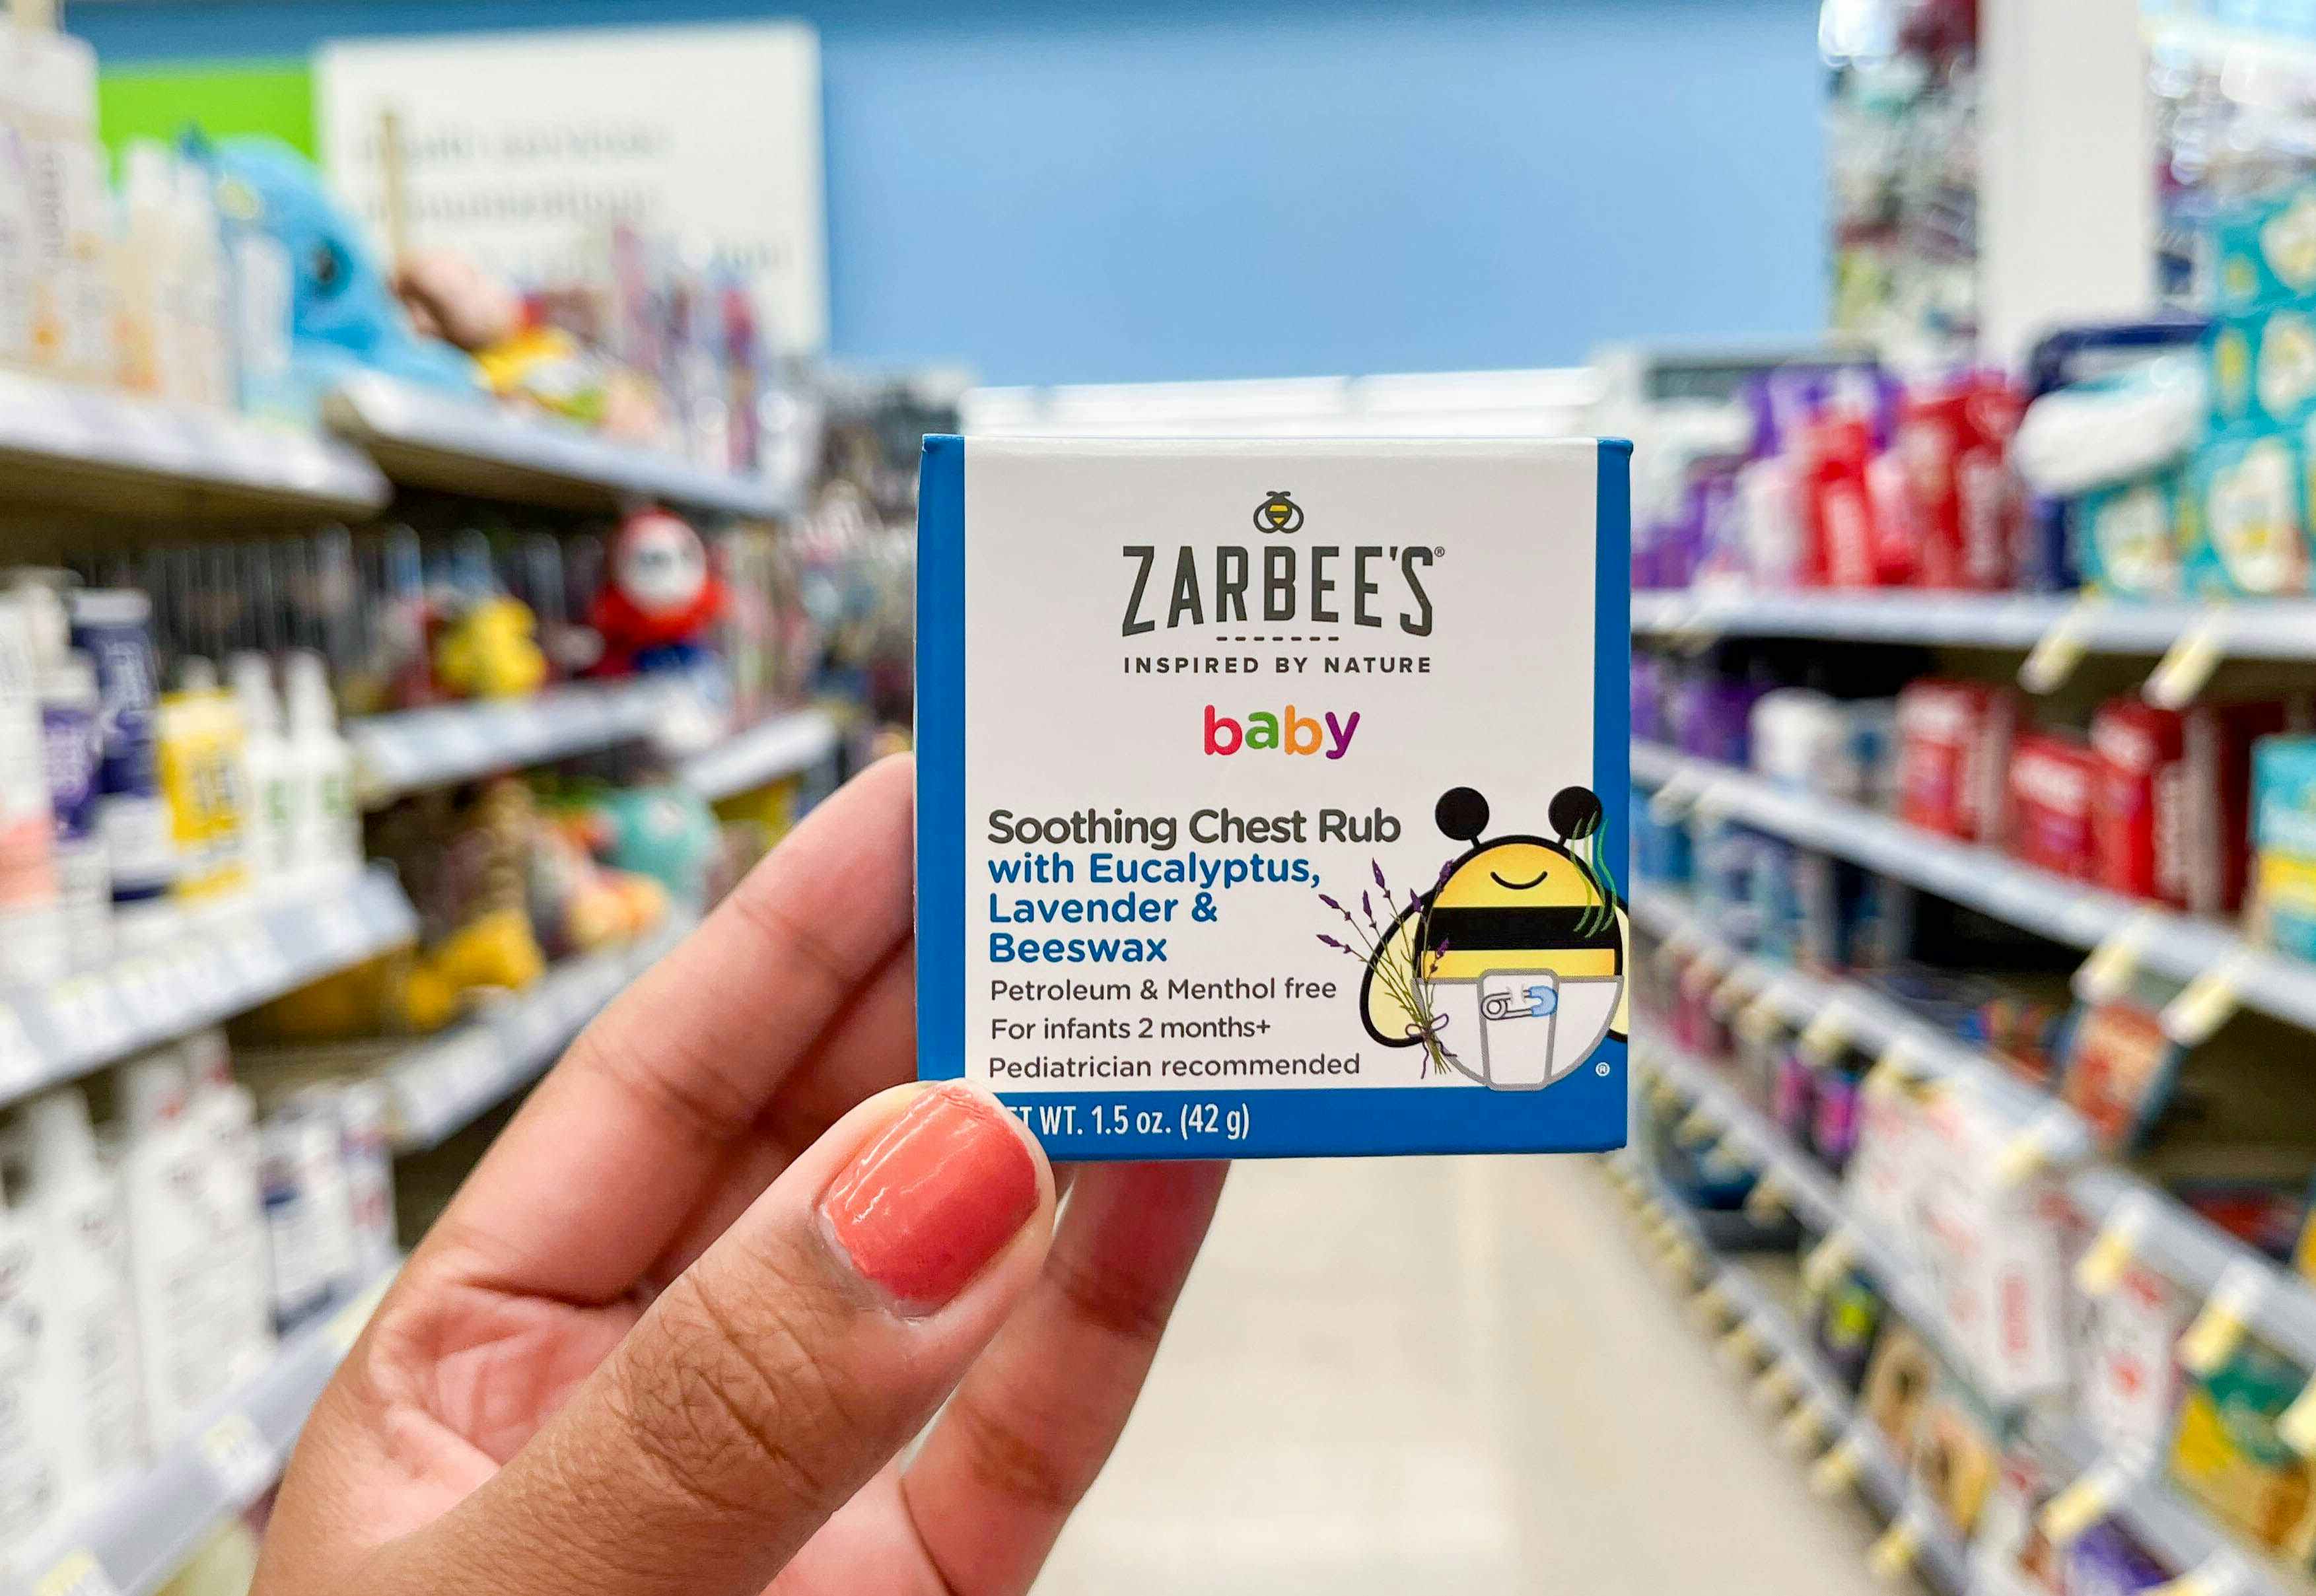 Zarbee's Baby Soothing Chest Rub, 2 for as Low as $5.14 on Amazon